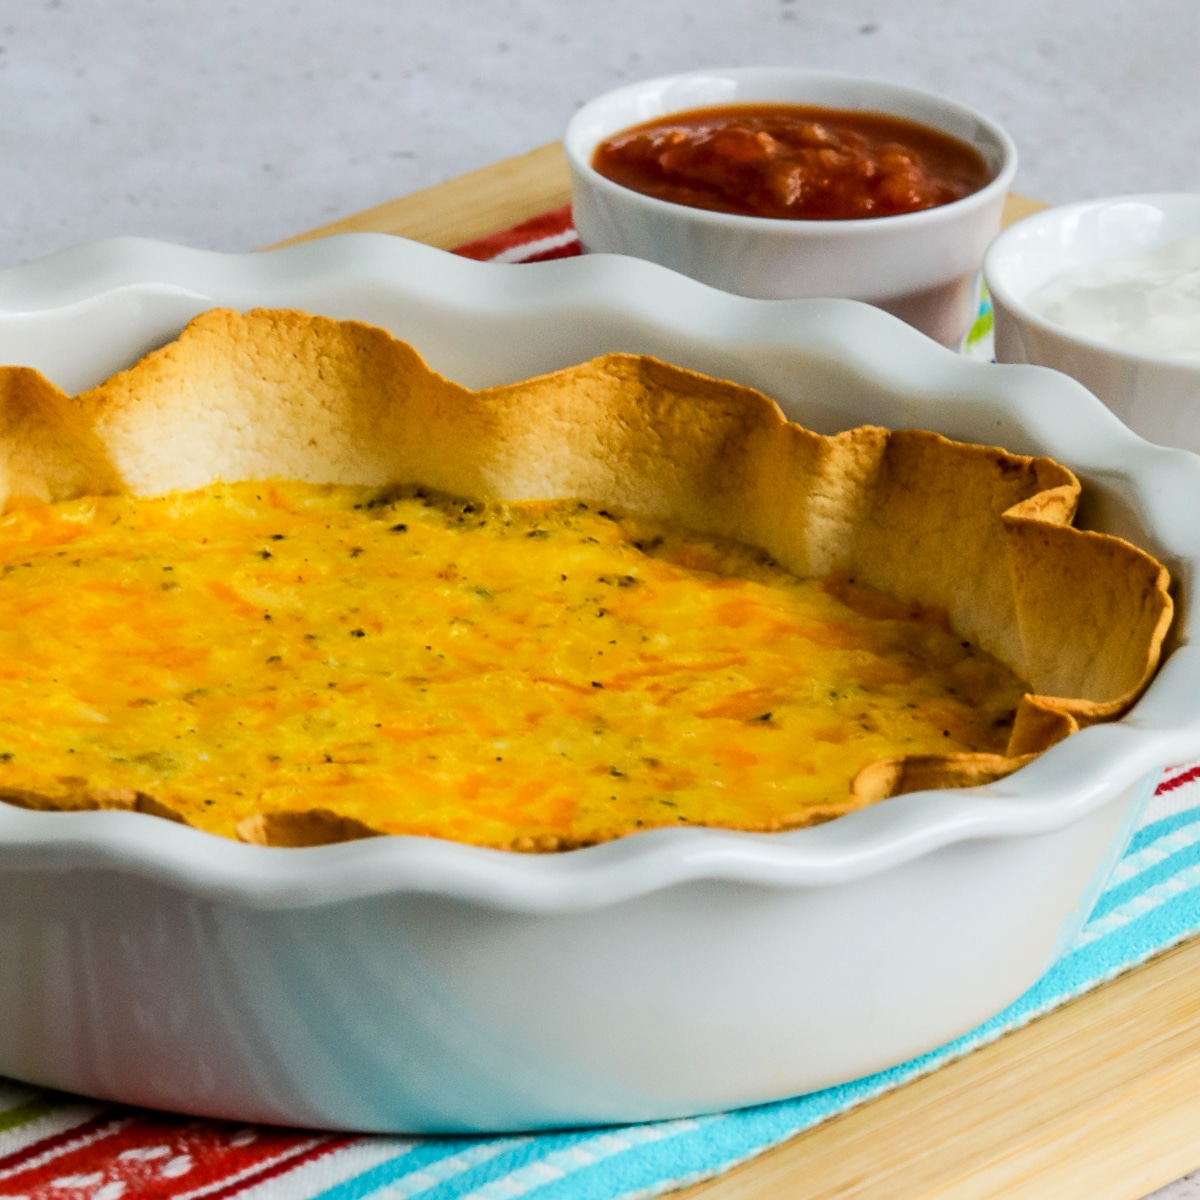 Square image for Tortilla Egg Bake in pie plate with sour cream and salsa on the side.